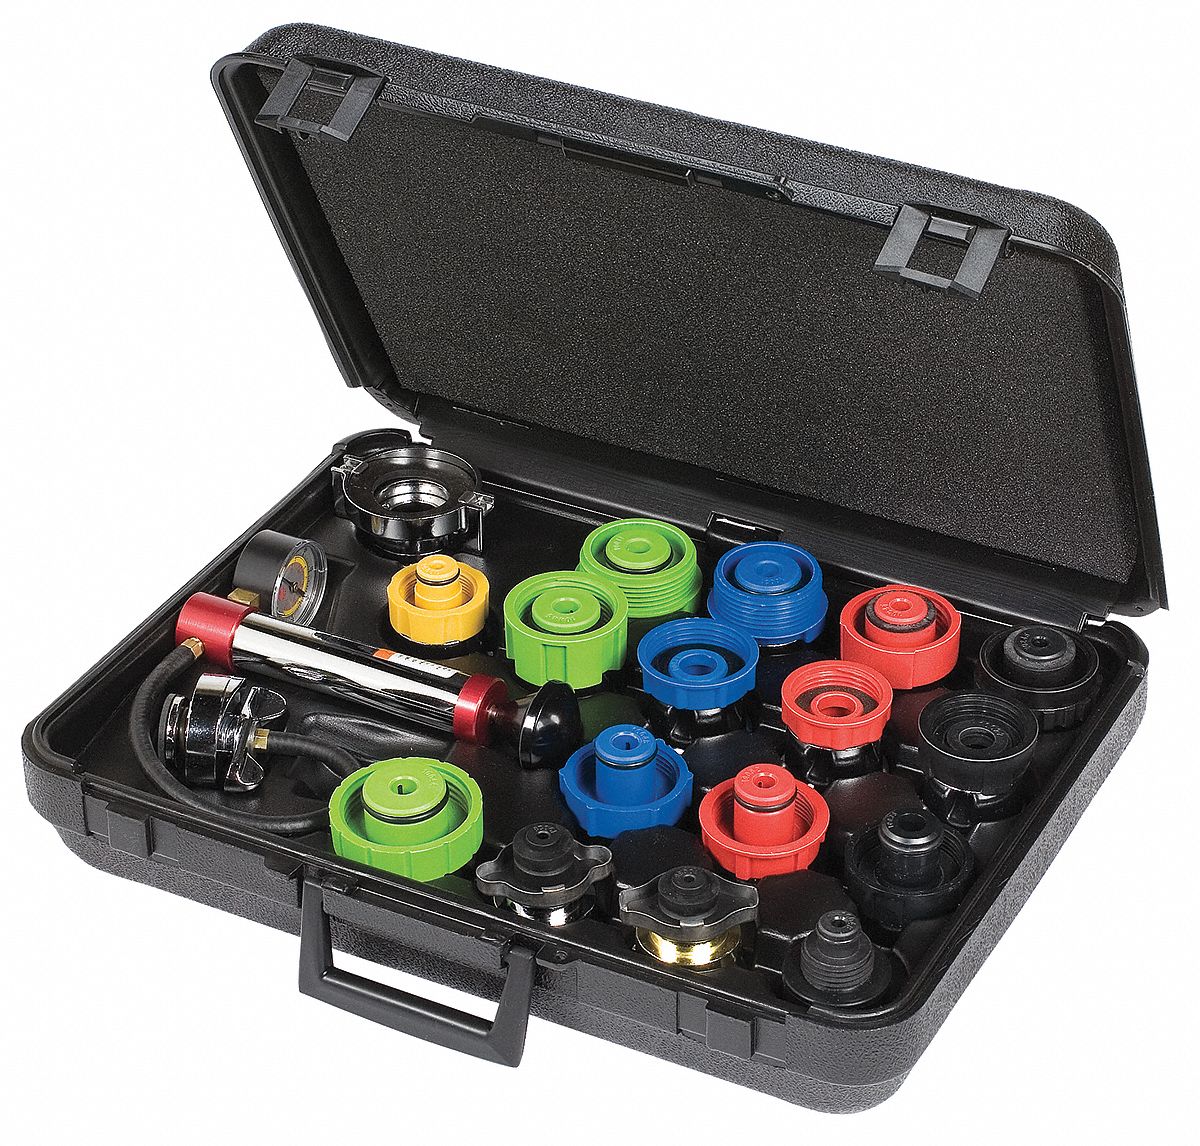 6RKR9 - Auto Cooling System Tester 23 Piece